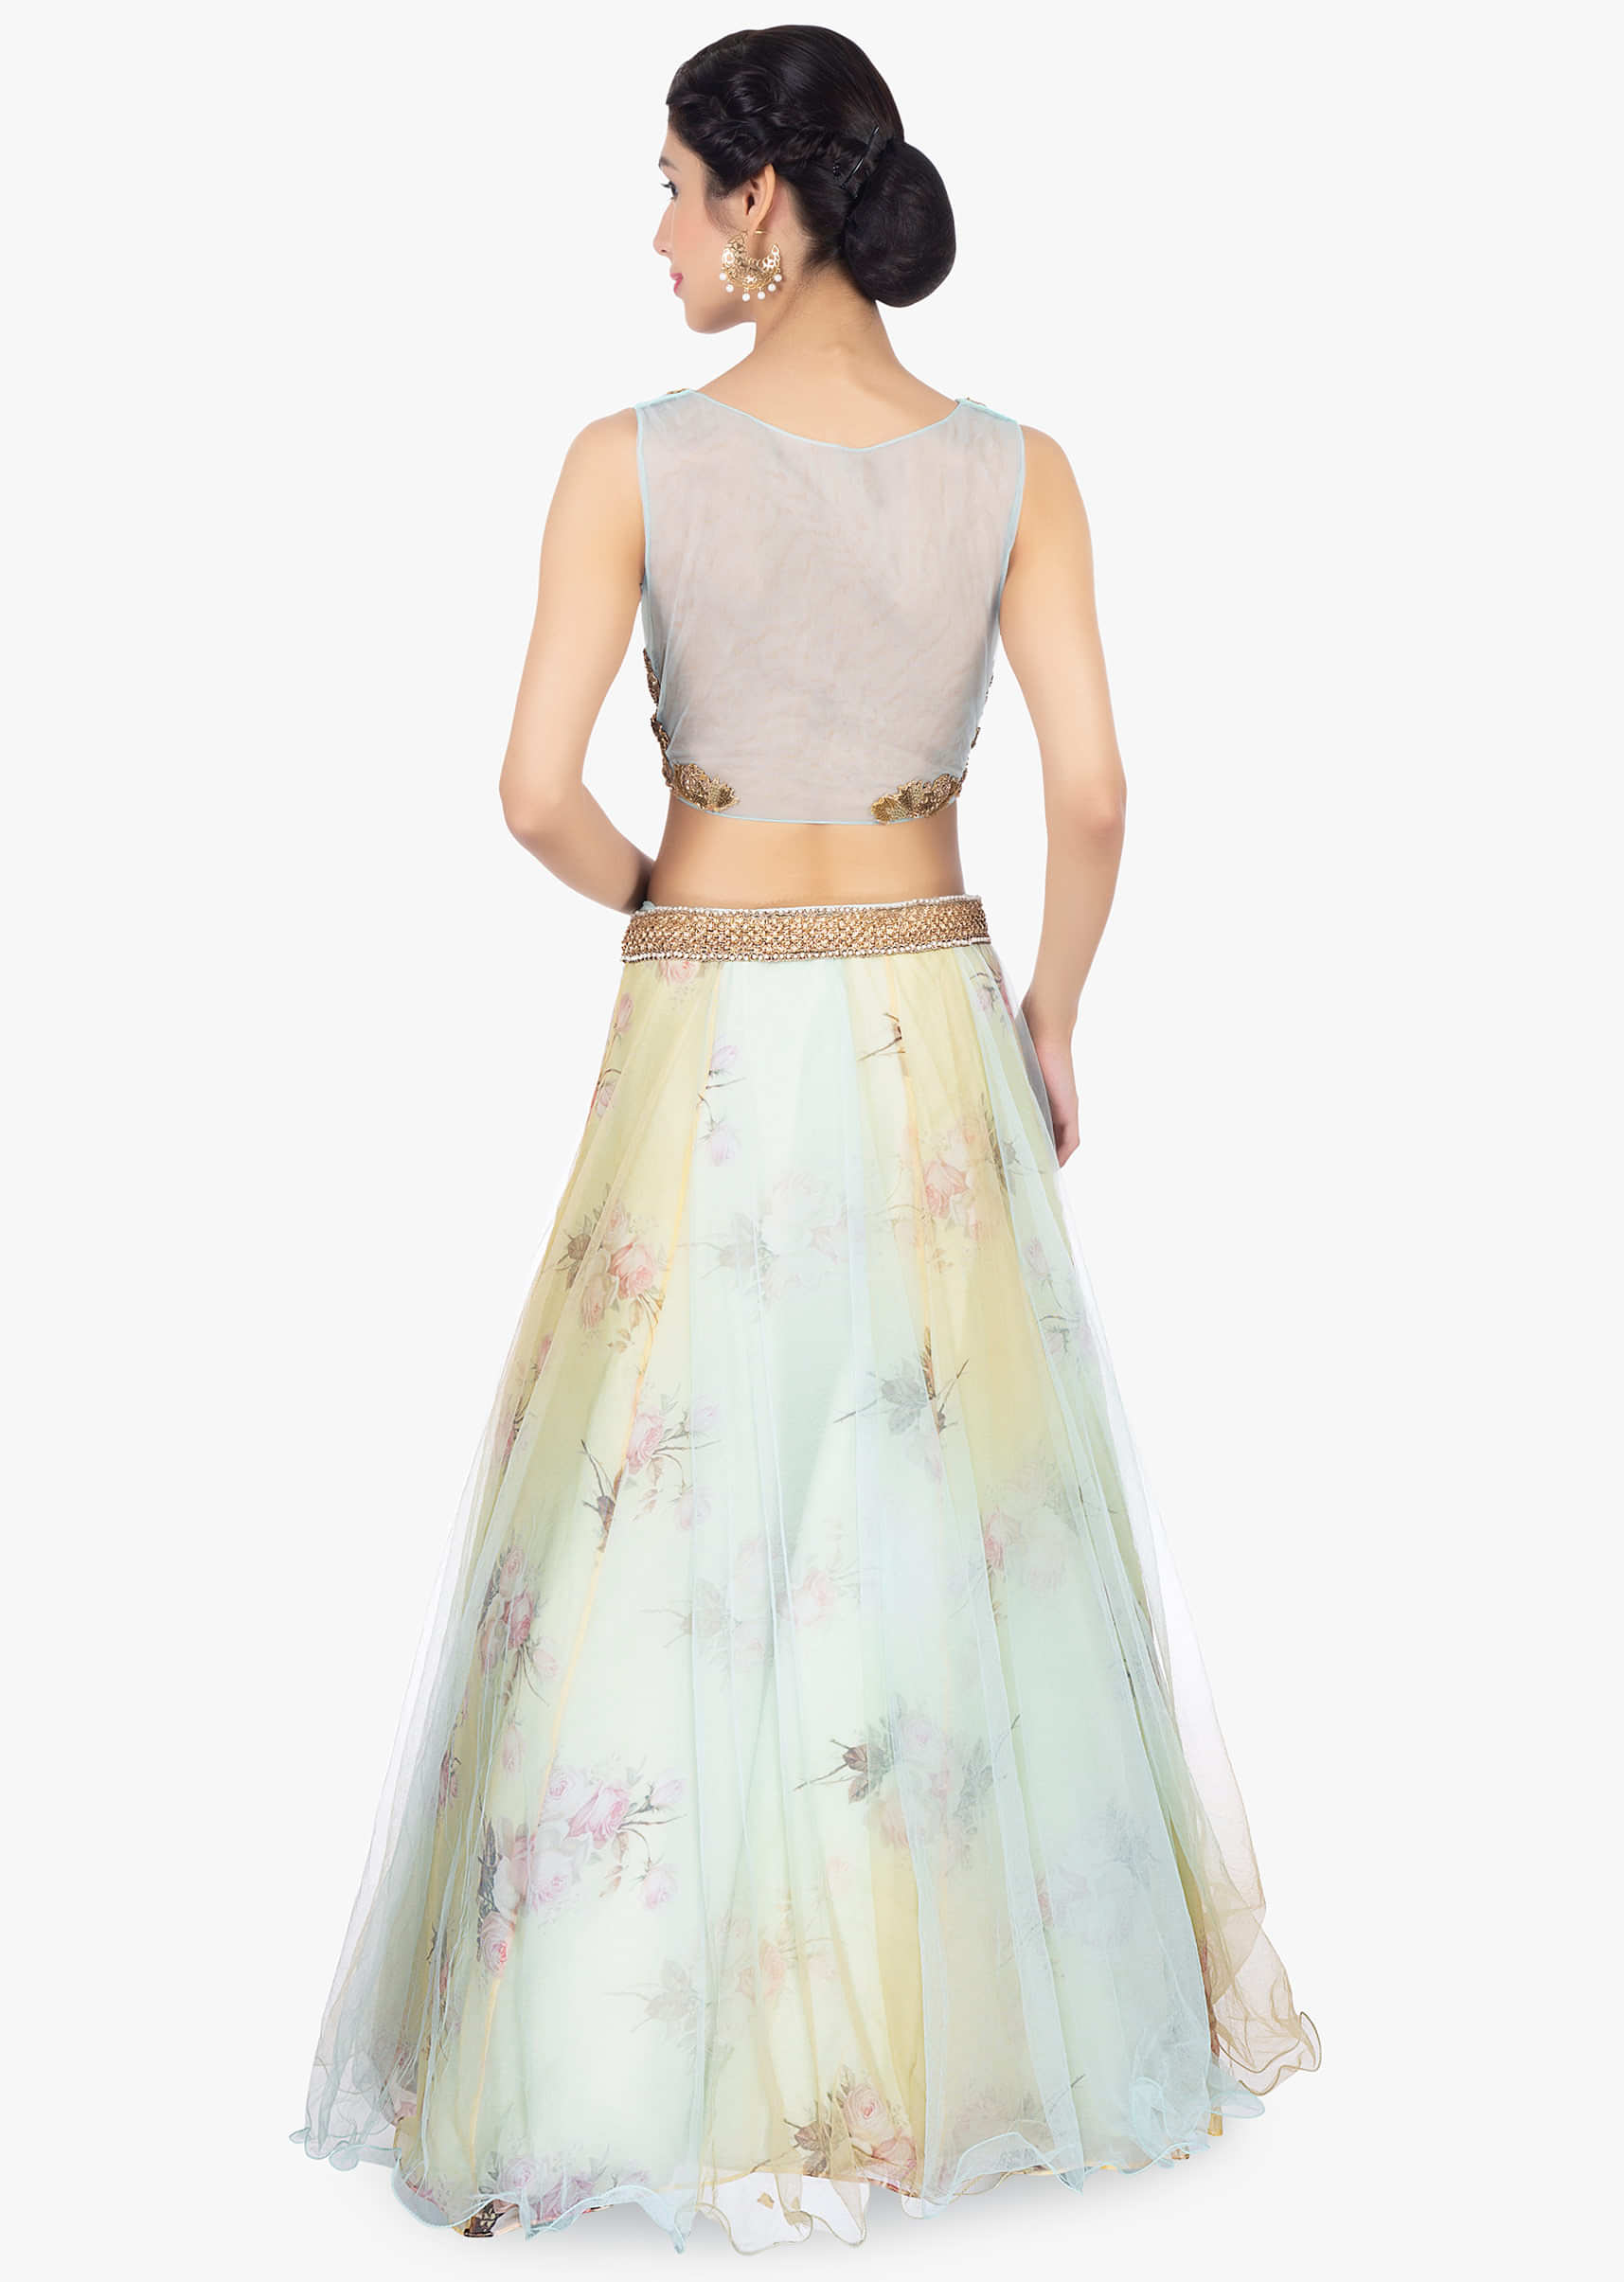 Floral printed organza lehenga with net top layer paired with a mint blouse and net dupatta 